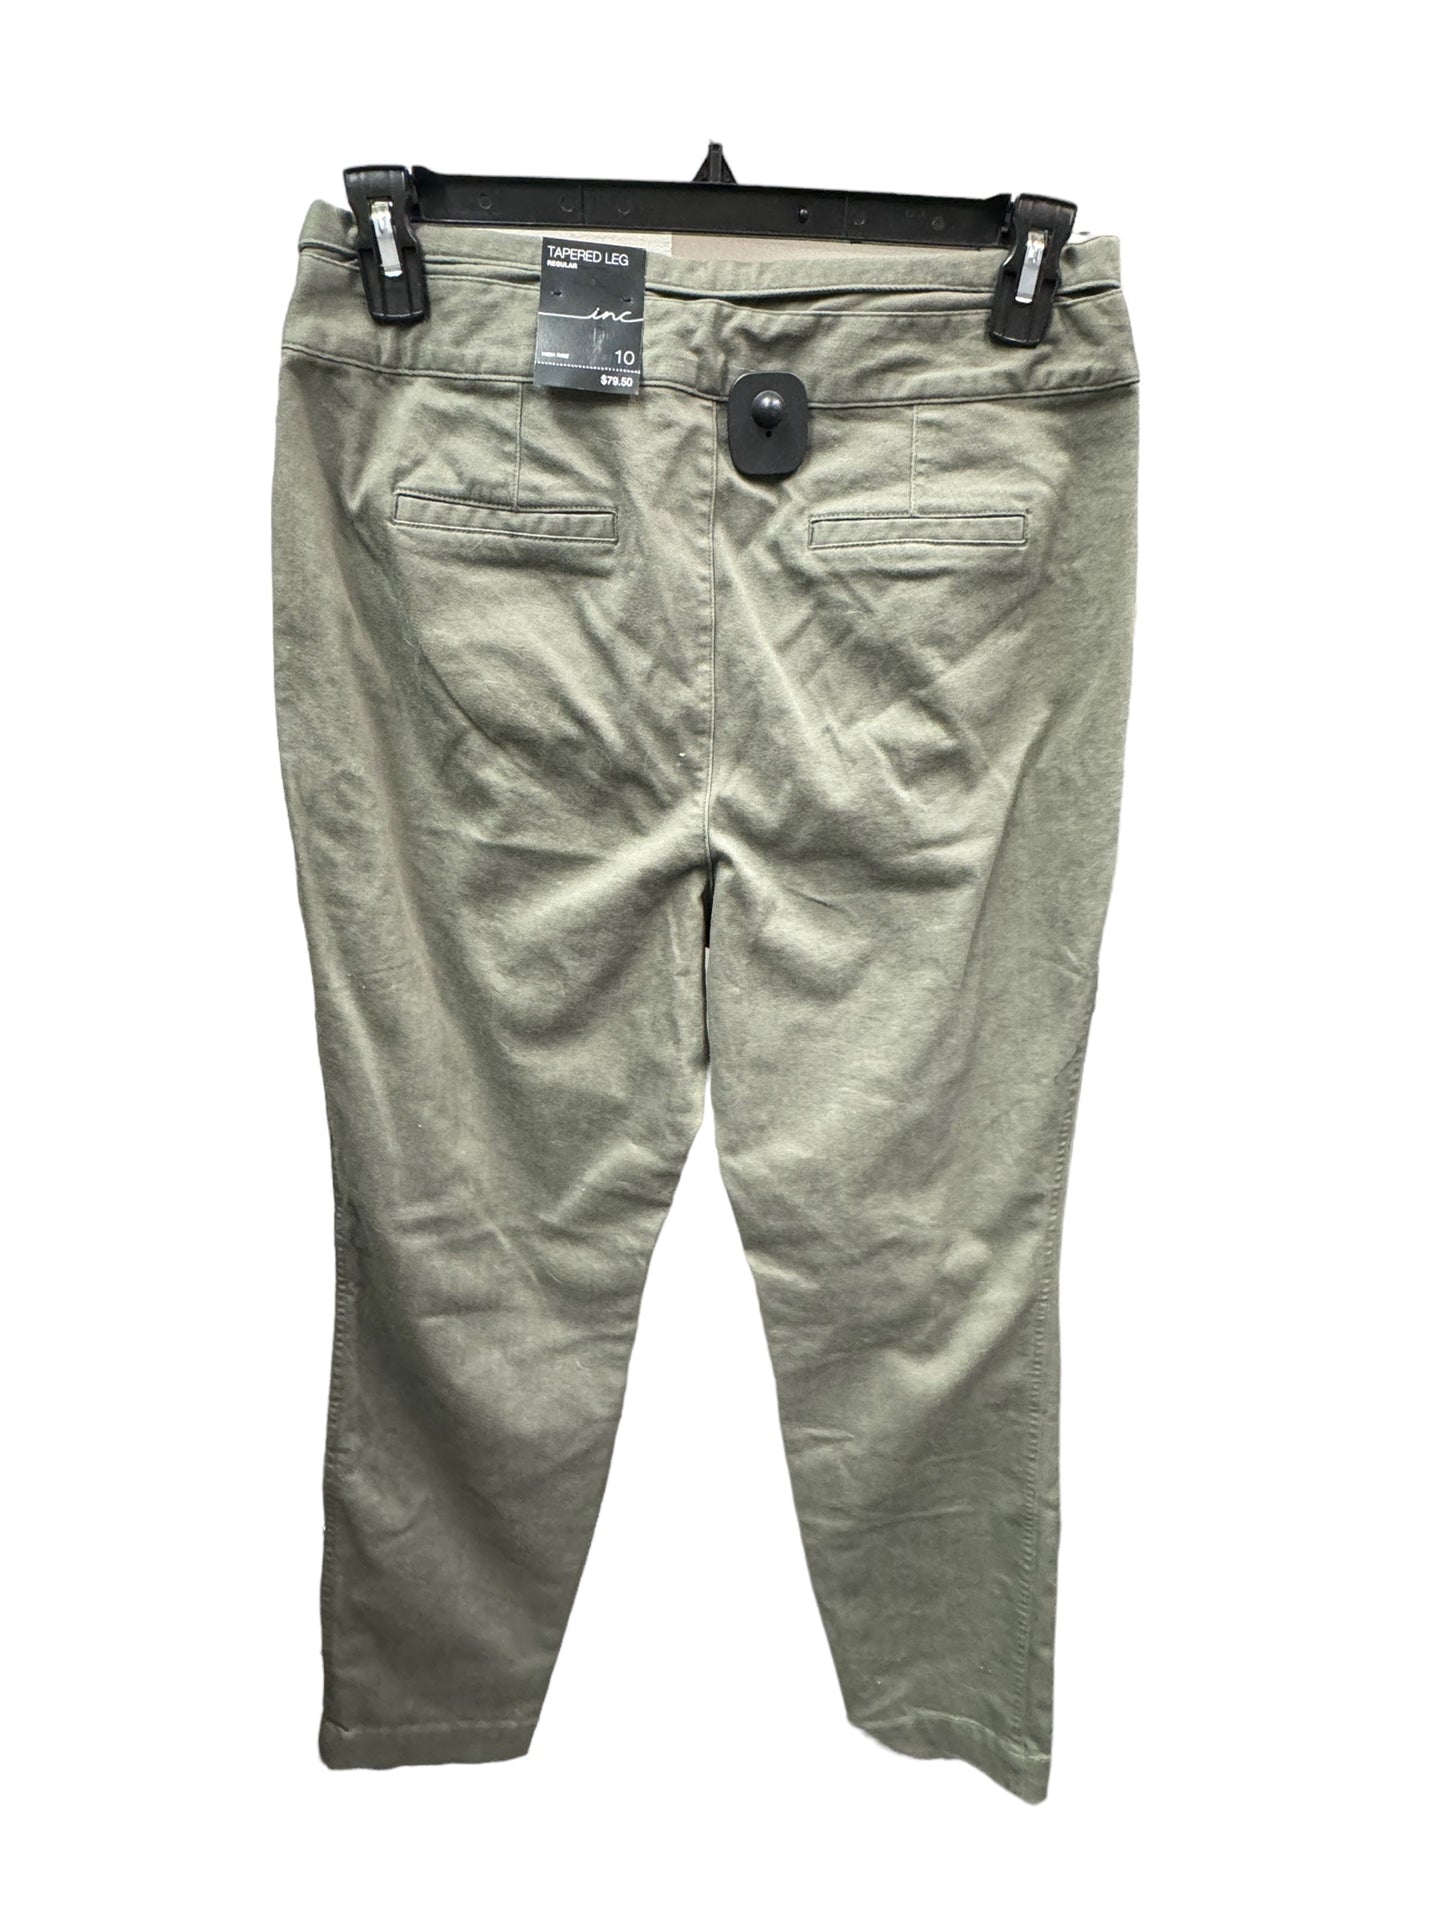 Pants Ankle By Inc  Size: 10